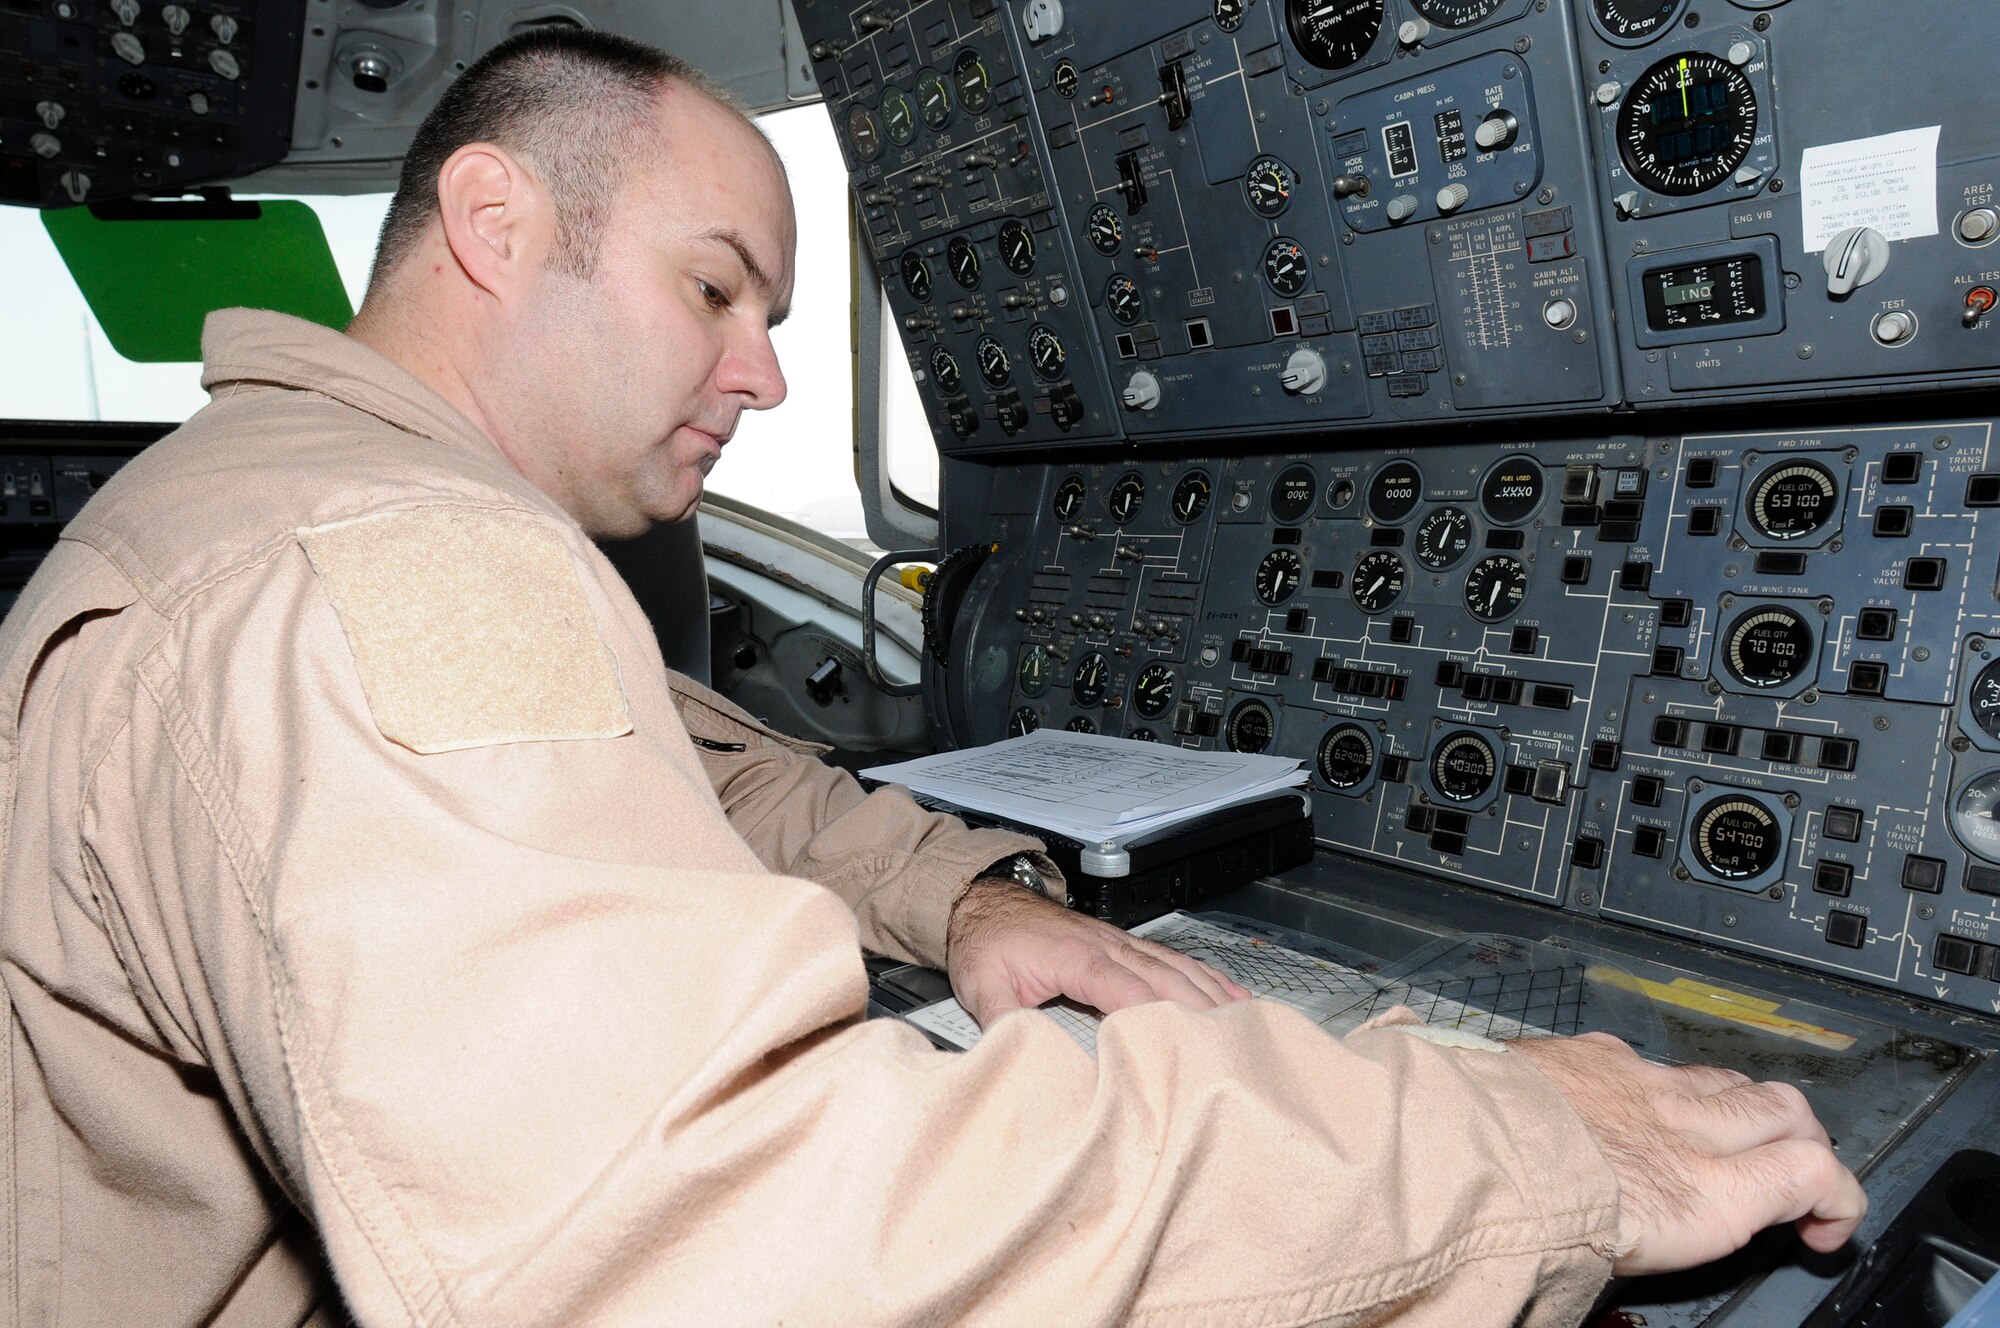 SOUTHWEST ASIA -- Master Sgt. Clifford Hughes from the 908th Expeditionary Air Refueling Squadron uses a fuel vectoring chart here Jan. 3. The chart is used to show what the aircraft center of gravity is with the fuel load. This is important so they can monitor the center of gravity as the fuel is being offloaded in flight. Sergeant Hughes has flown over 300 combat missions, in 7 years of deploying. He has deployed nearly 800 days. Six of the deployments were with the MH-53M Pavelow and three on the KC-10 A Extender. Sergeant Hughes is deployed from the 2nd ARS McGuire Air Force Base, N.J., his hometown is Goshen, Ohio. (U.S. Air Force photo/Tech. Sgt. Christopher A. Campbell) (released)